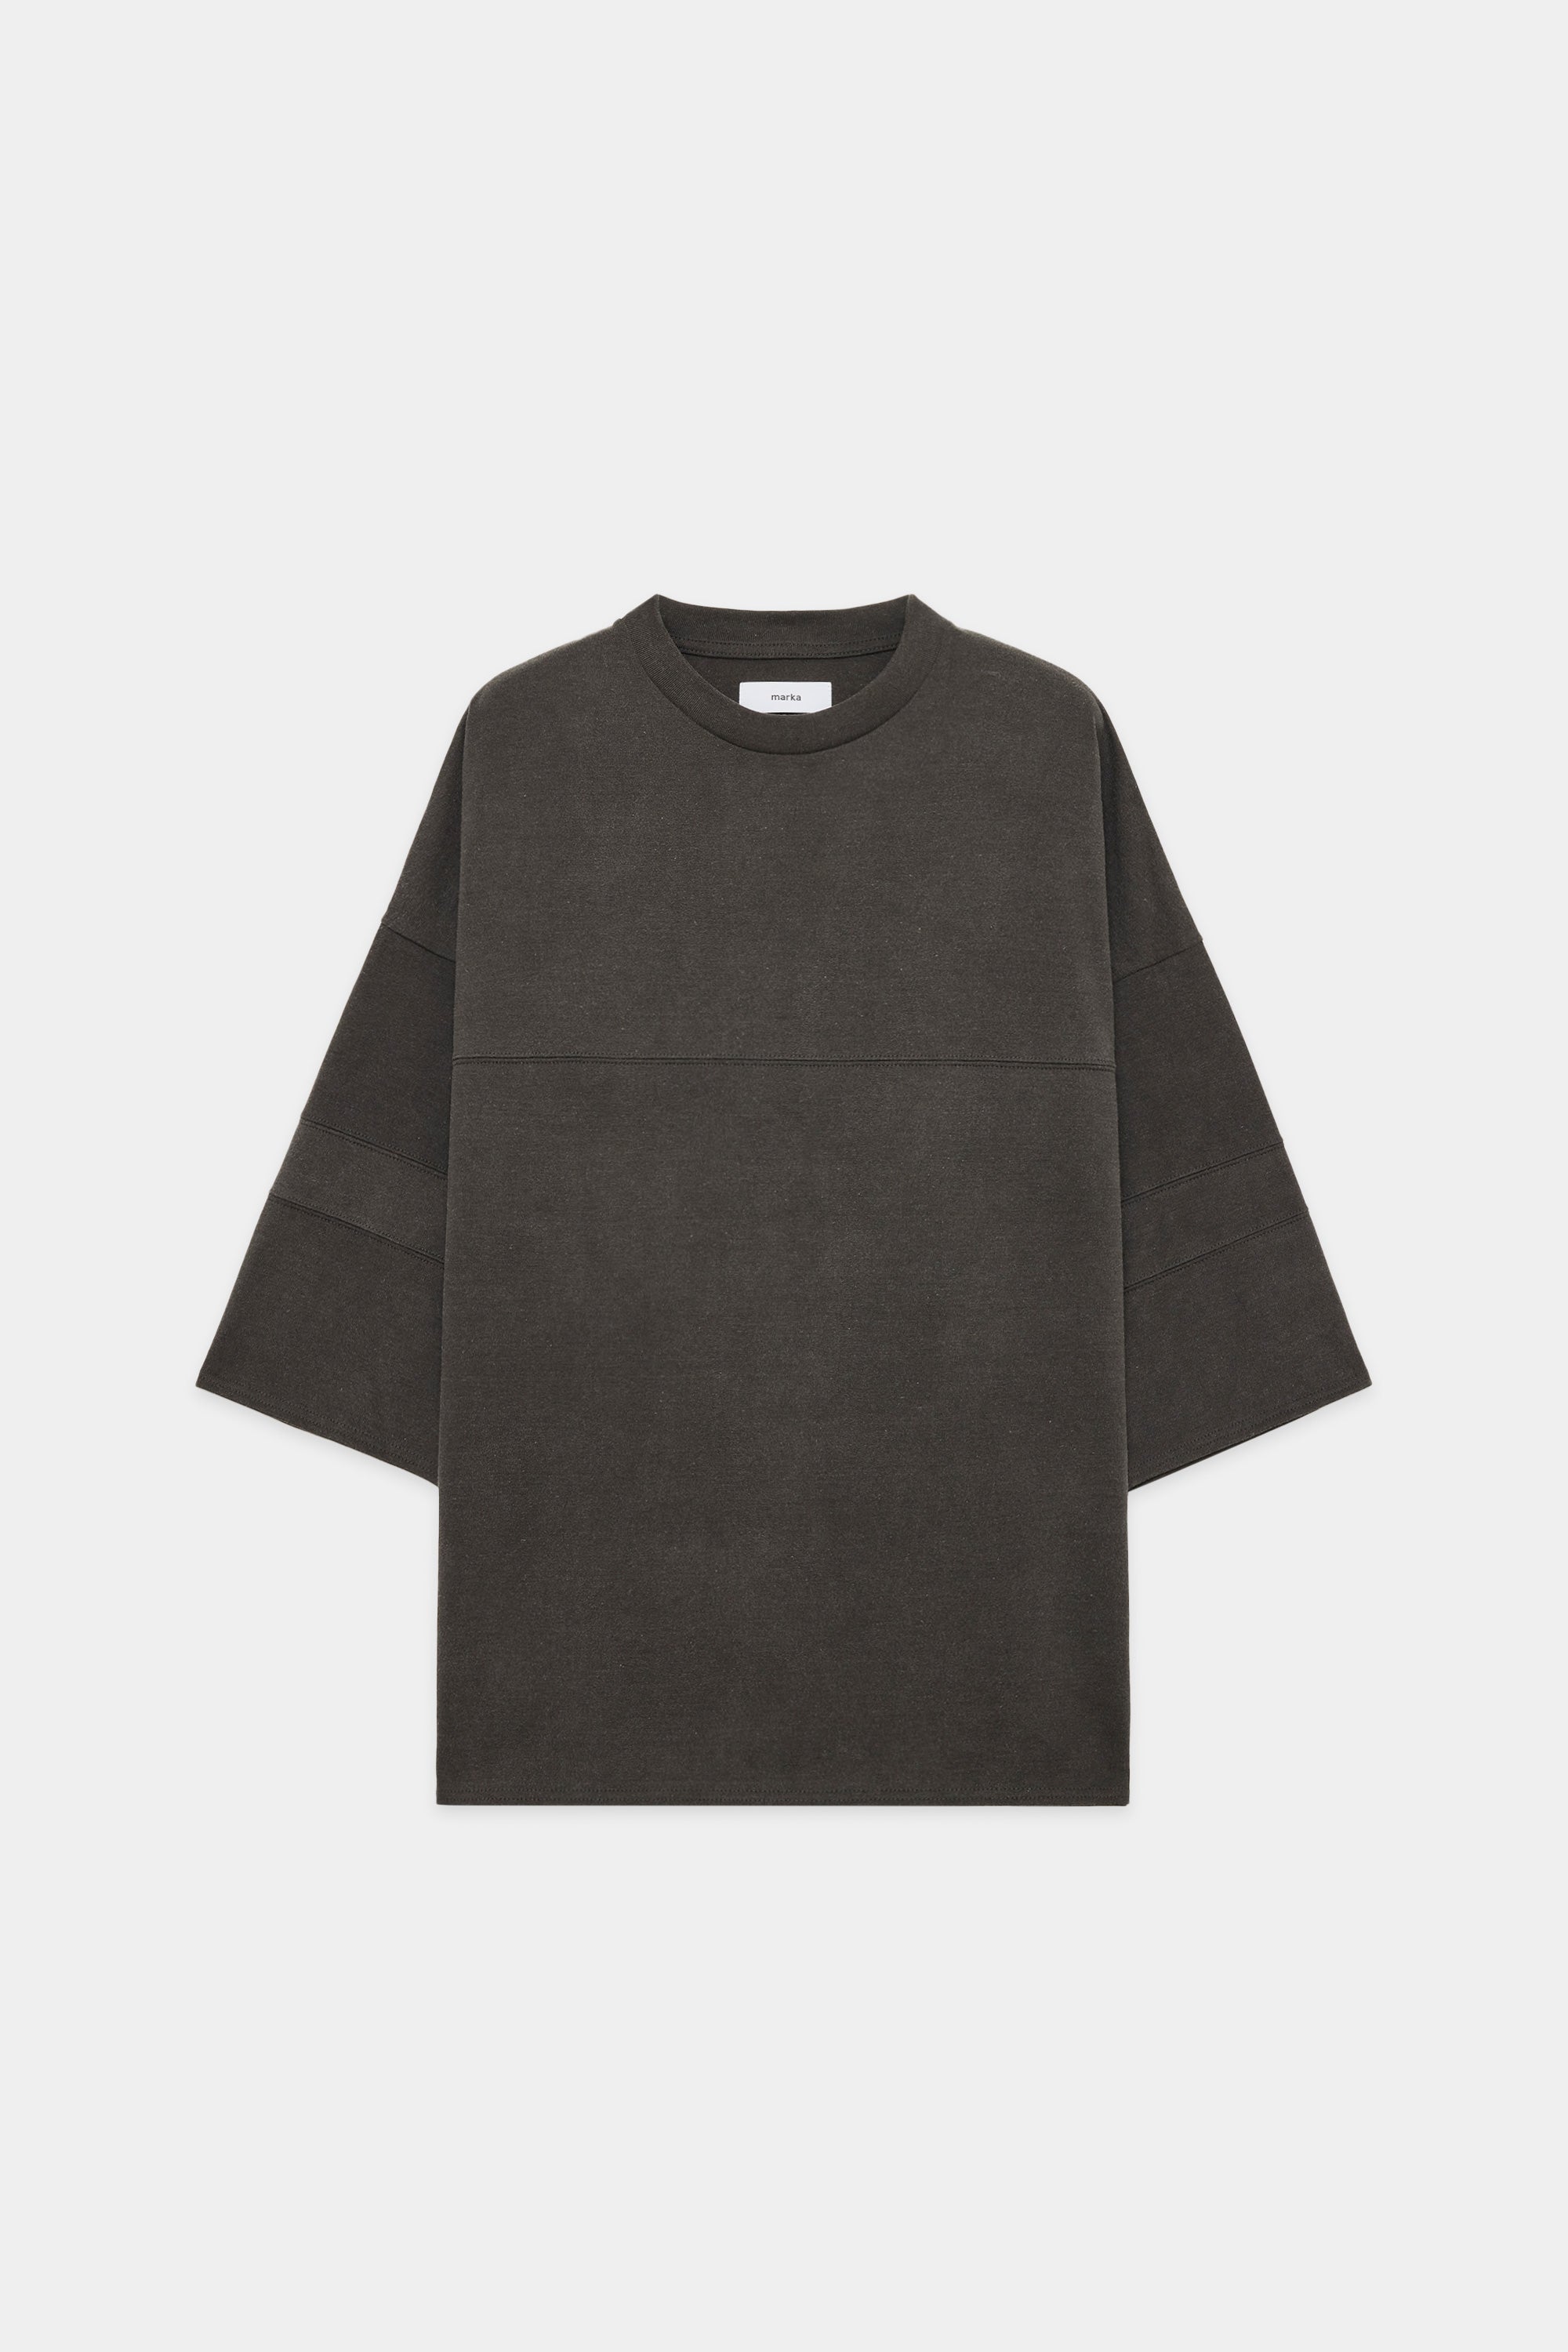 20//1 RECYCLE SUVIN ORGANIC COTTON KNIT FOOTBALL TEE, Faded Black